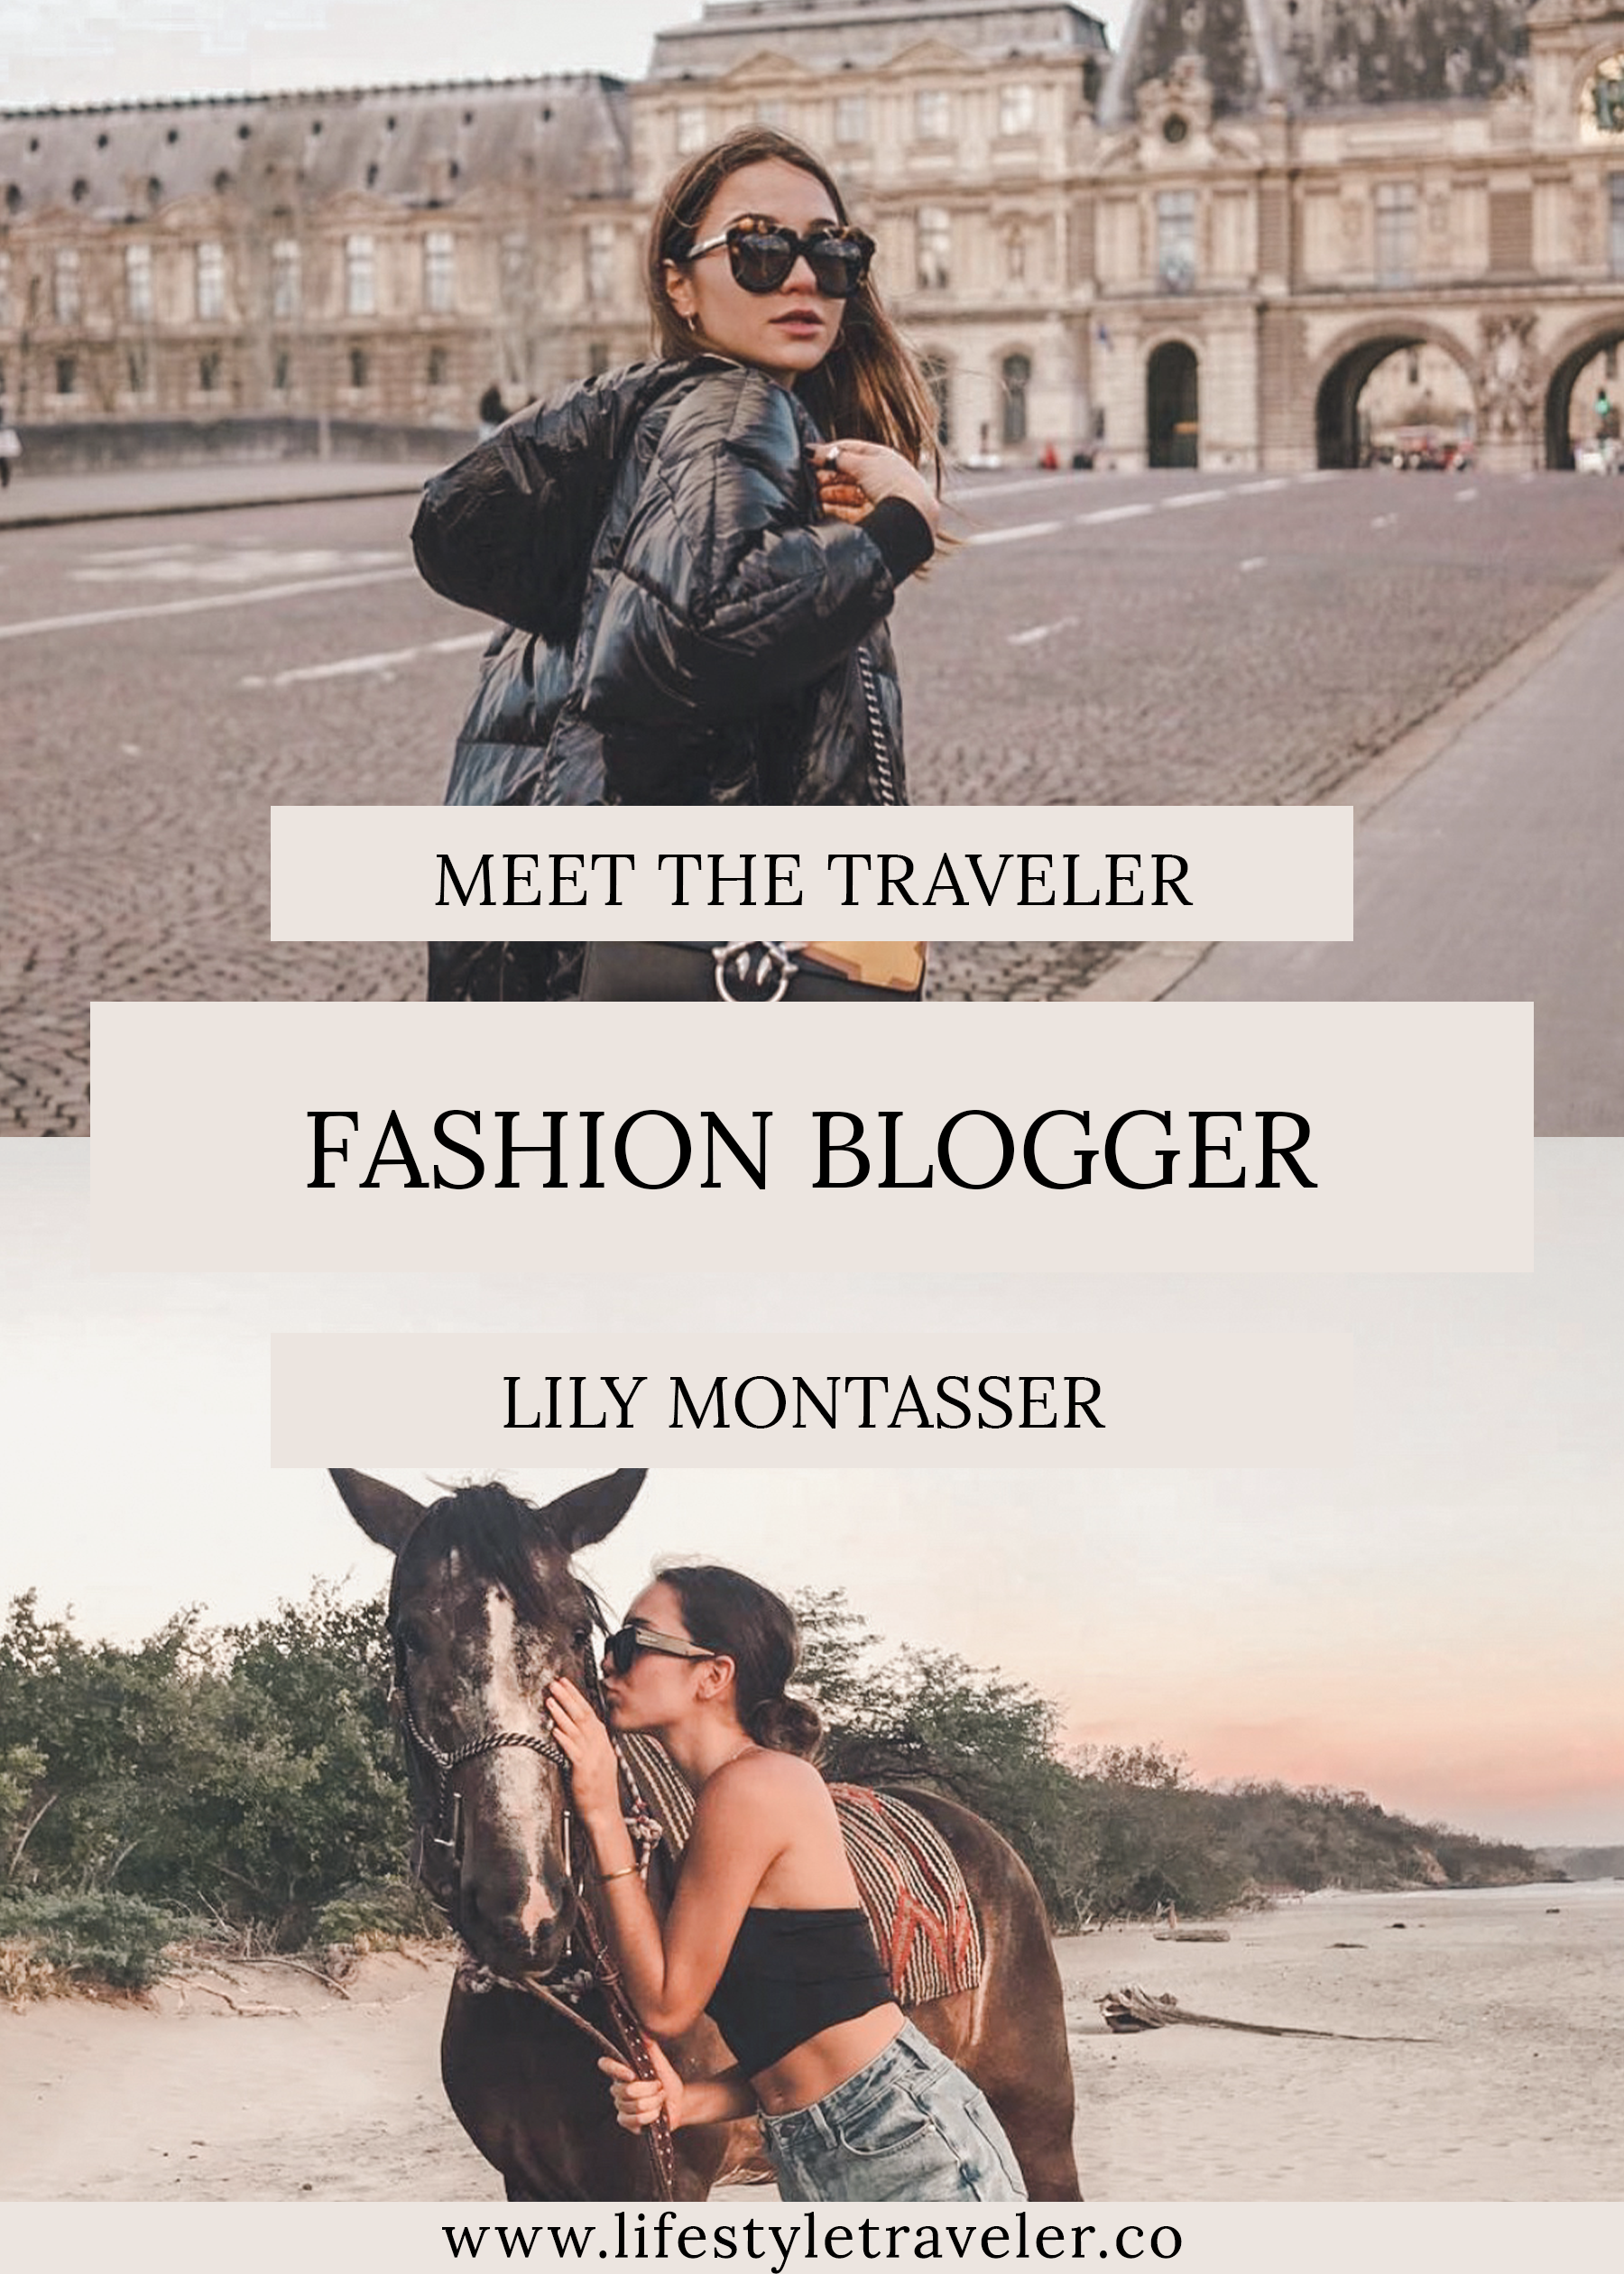 Meet The Traveler: Fashion Blogger Lily Montasser | lifestyletraveler.co | IG: @lifestyletraveler.co | Photo by: Lily Montasser